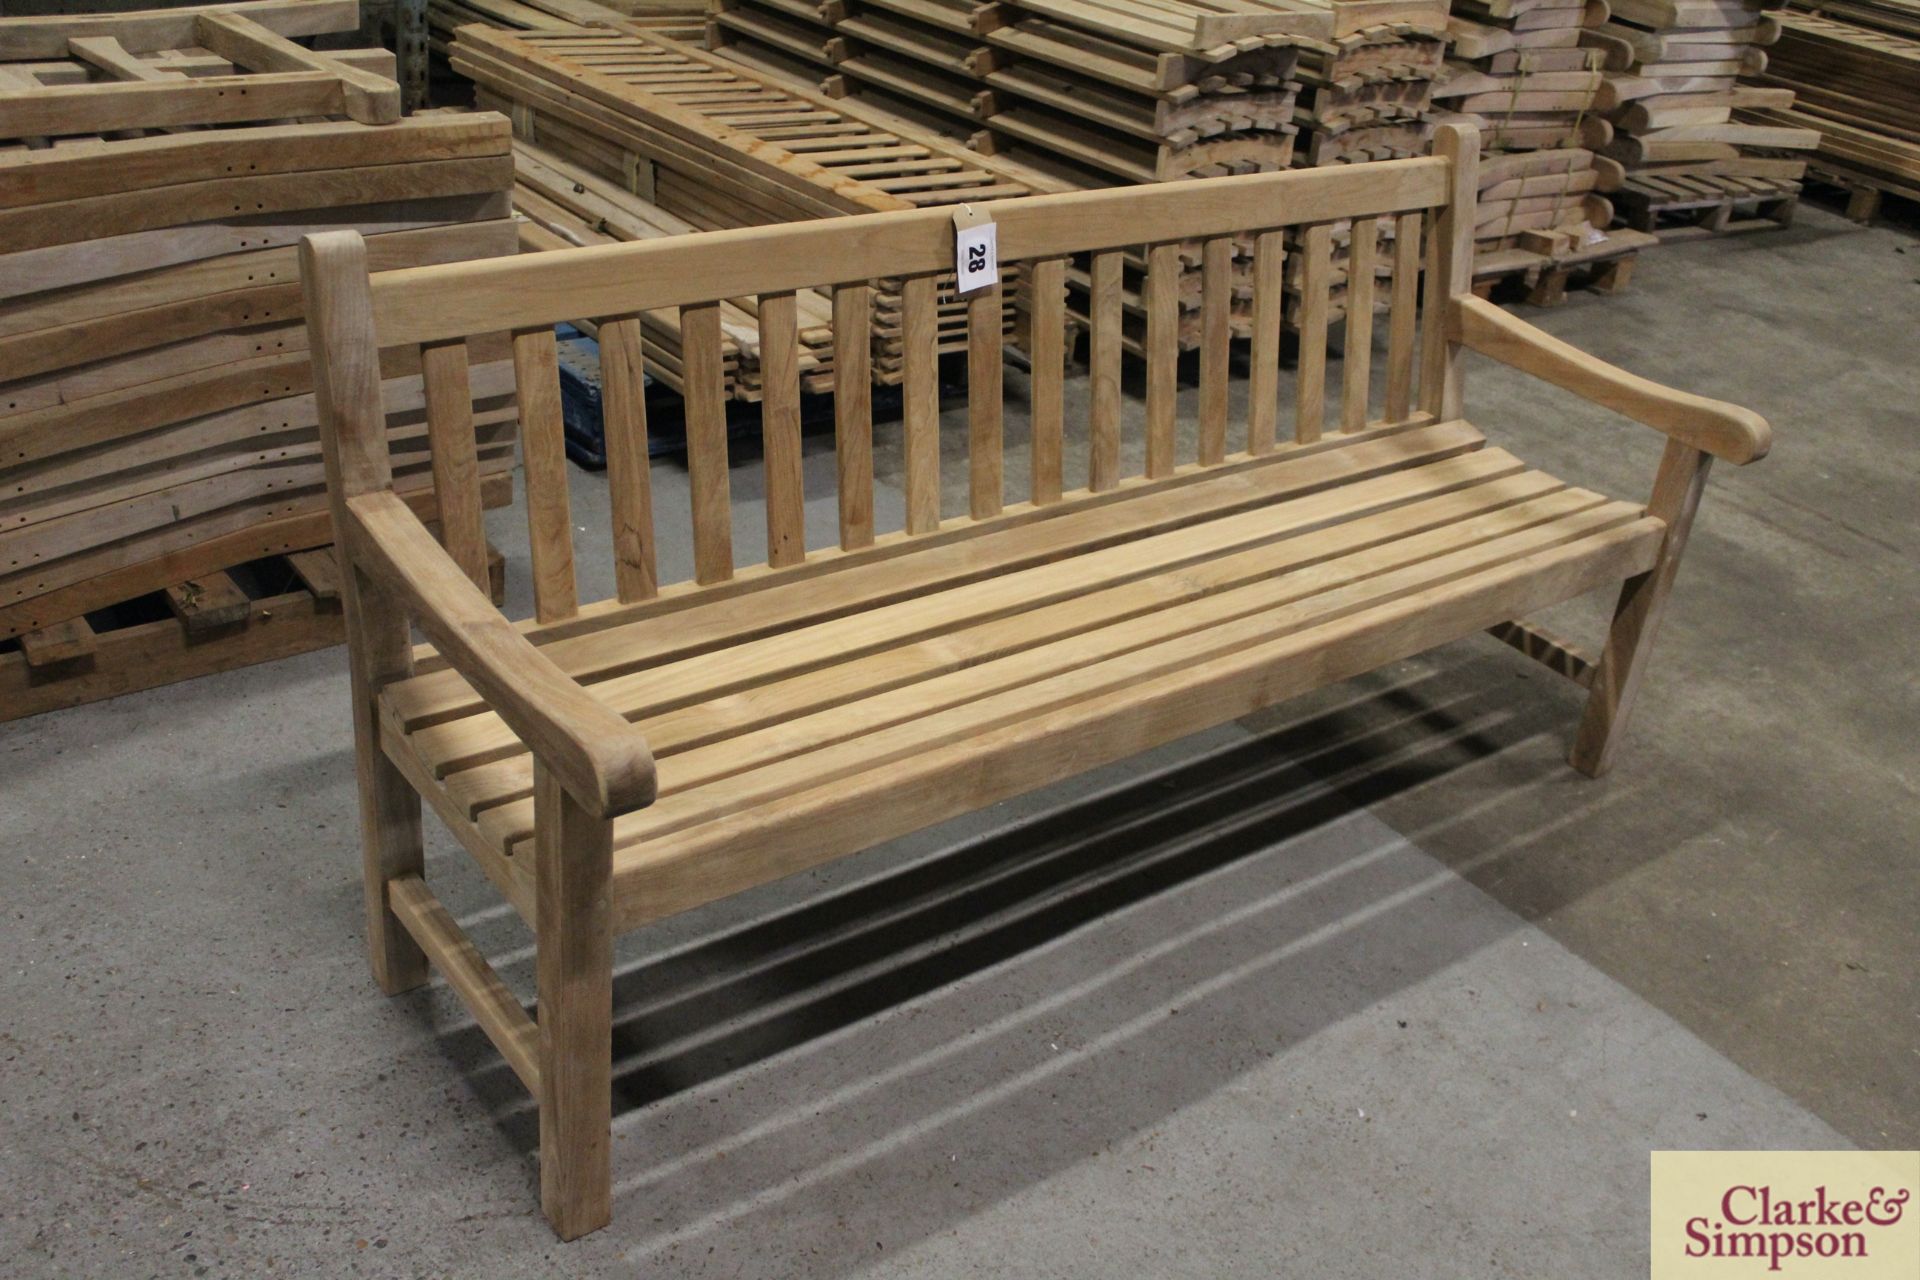 1x assembled Teak 6ft bench and components for a further 11 benches.